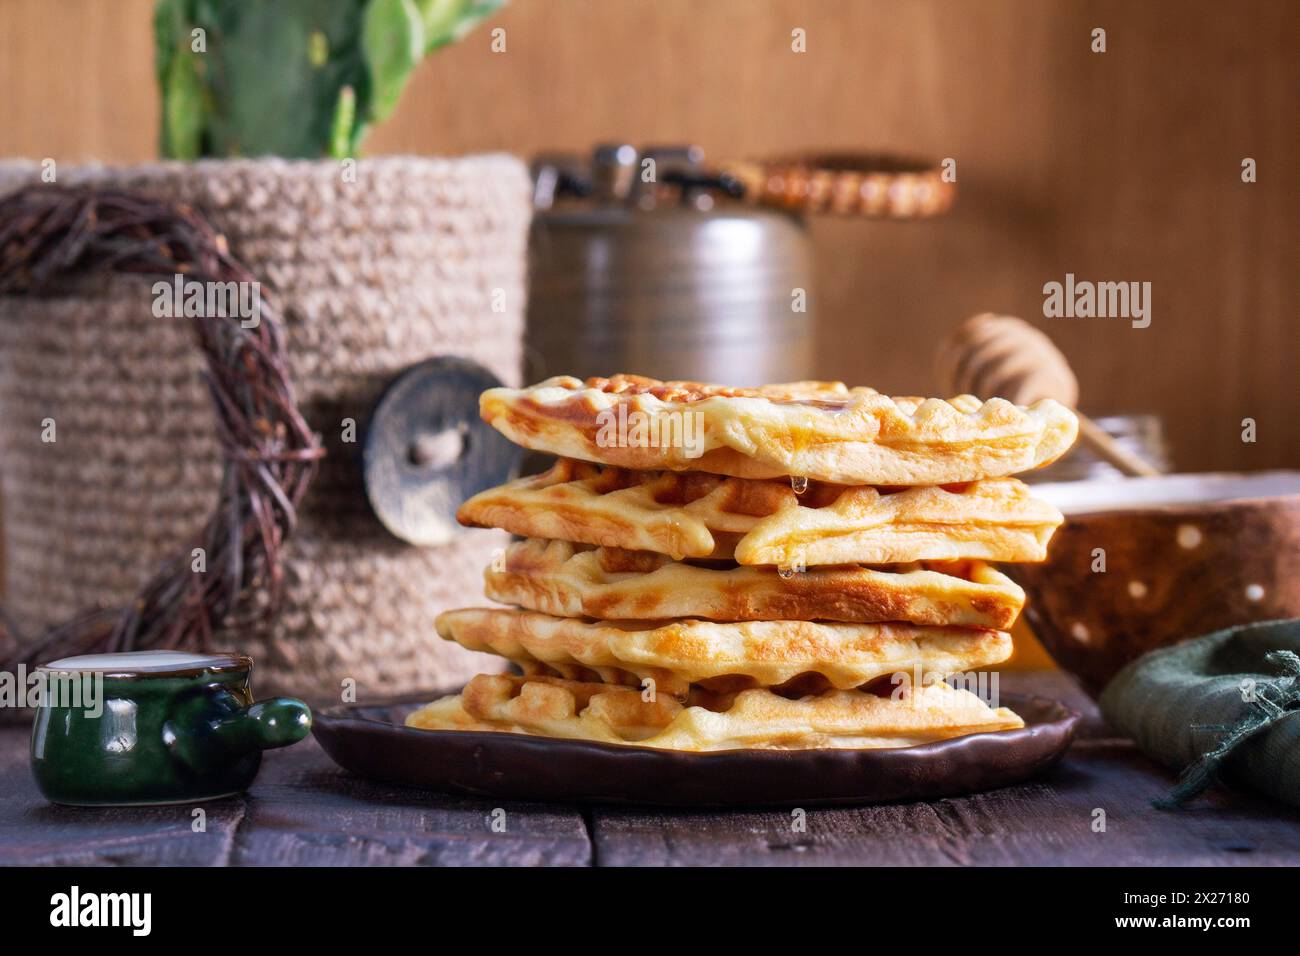 Belgian waffles served with honey, cream and sai on a wooden background. Rustic style, selective focus. Stock Photo